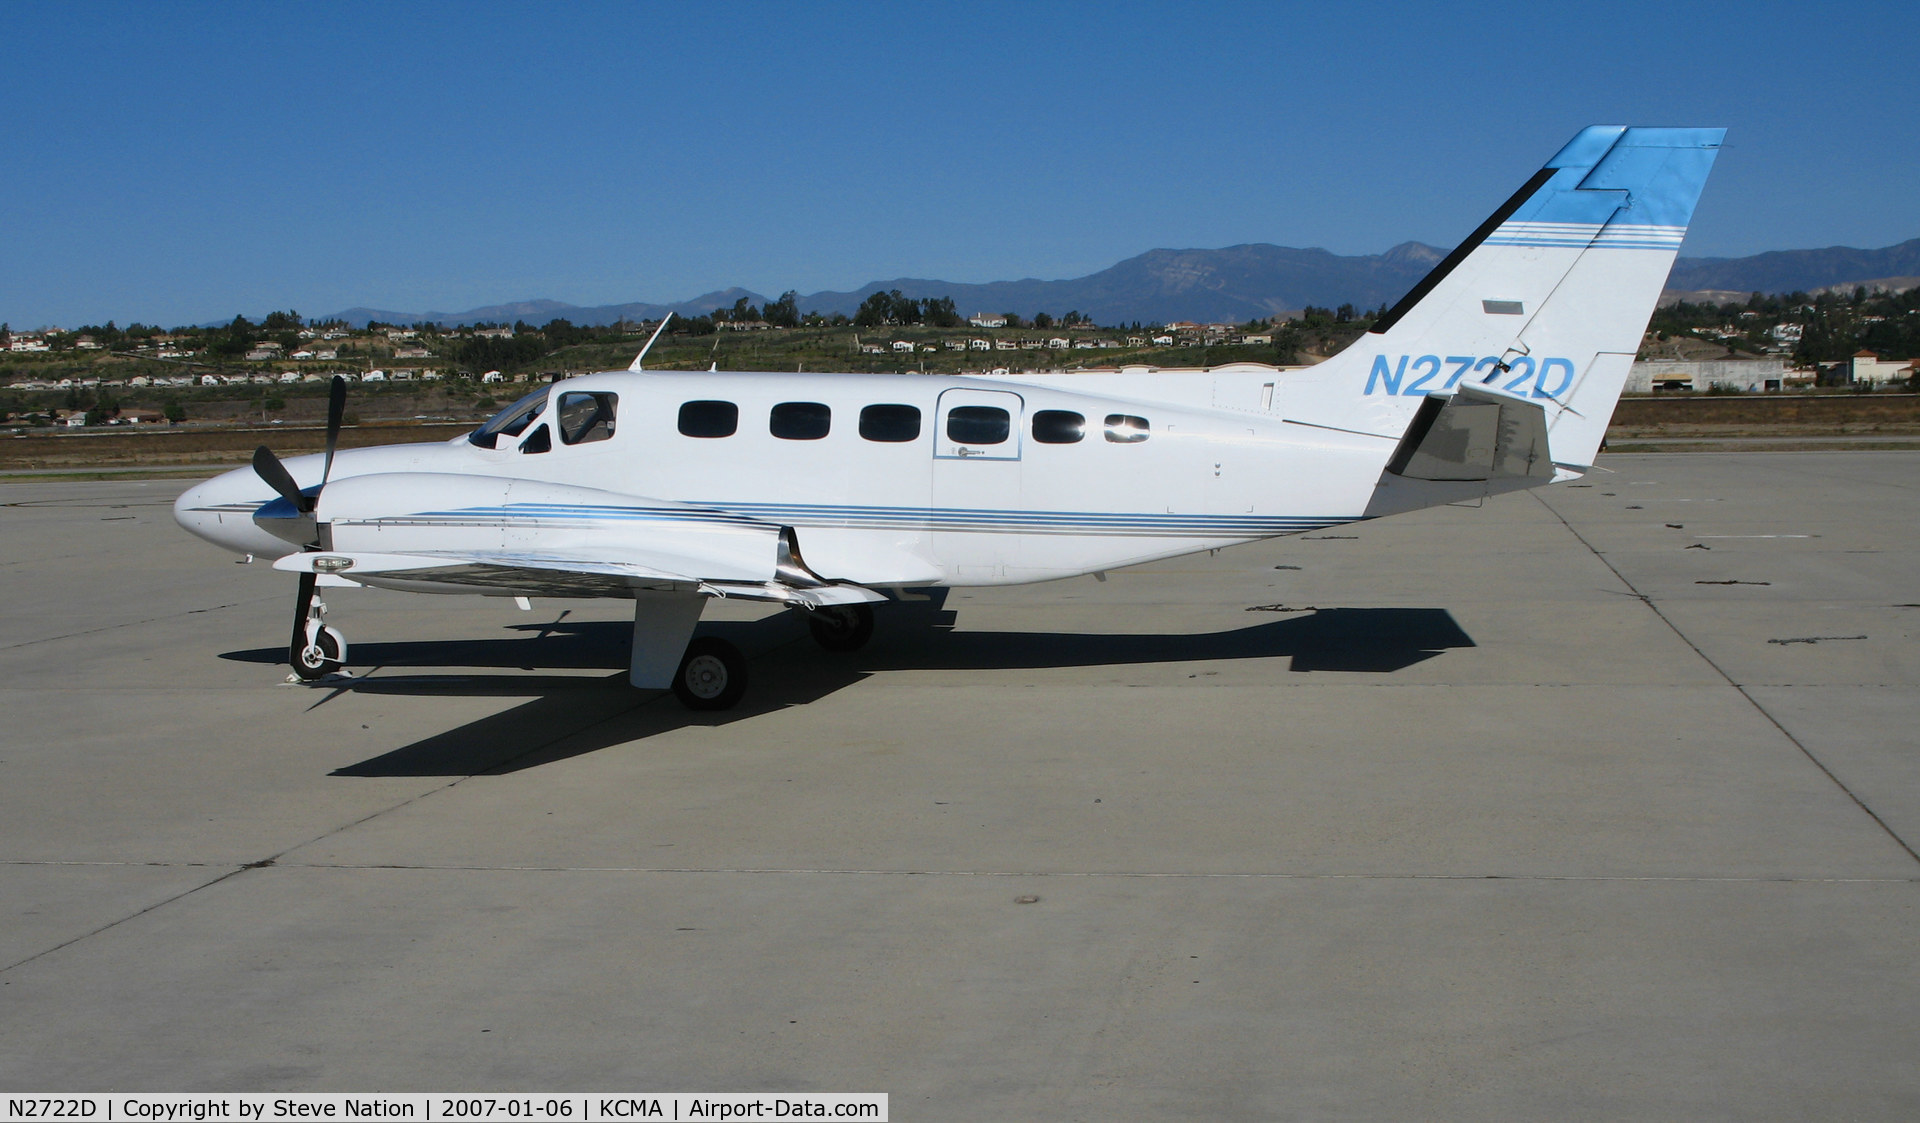 N2722D, 1980 Cessna 441 Conquest II C/N 441-0168, USA Gasoline 1980 Cessna 441 call;s Camarillo Airport, CA home - seen on balmy, sunny Jan 2007 picture postcard day